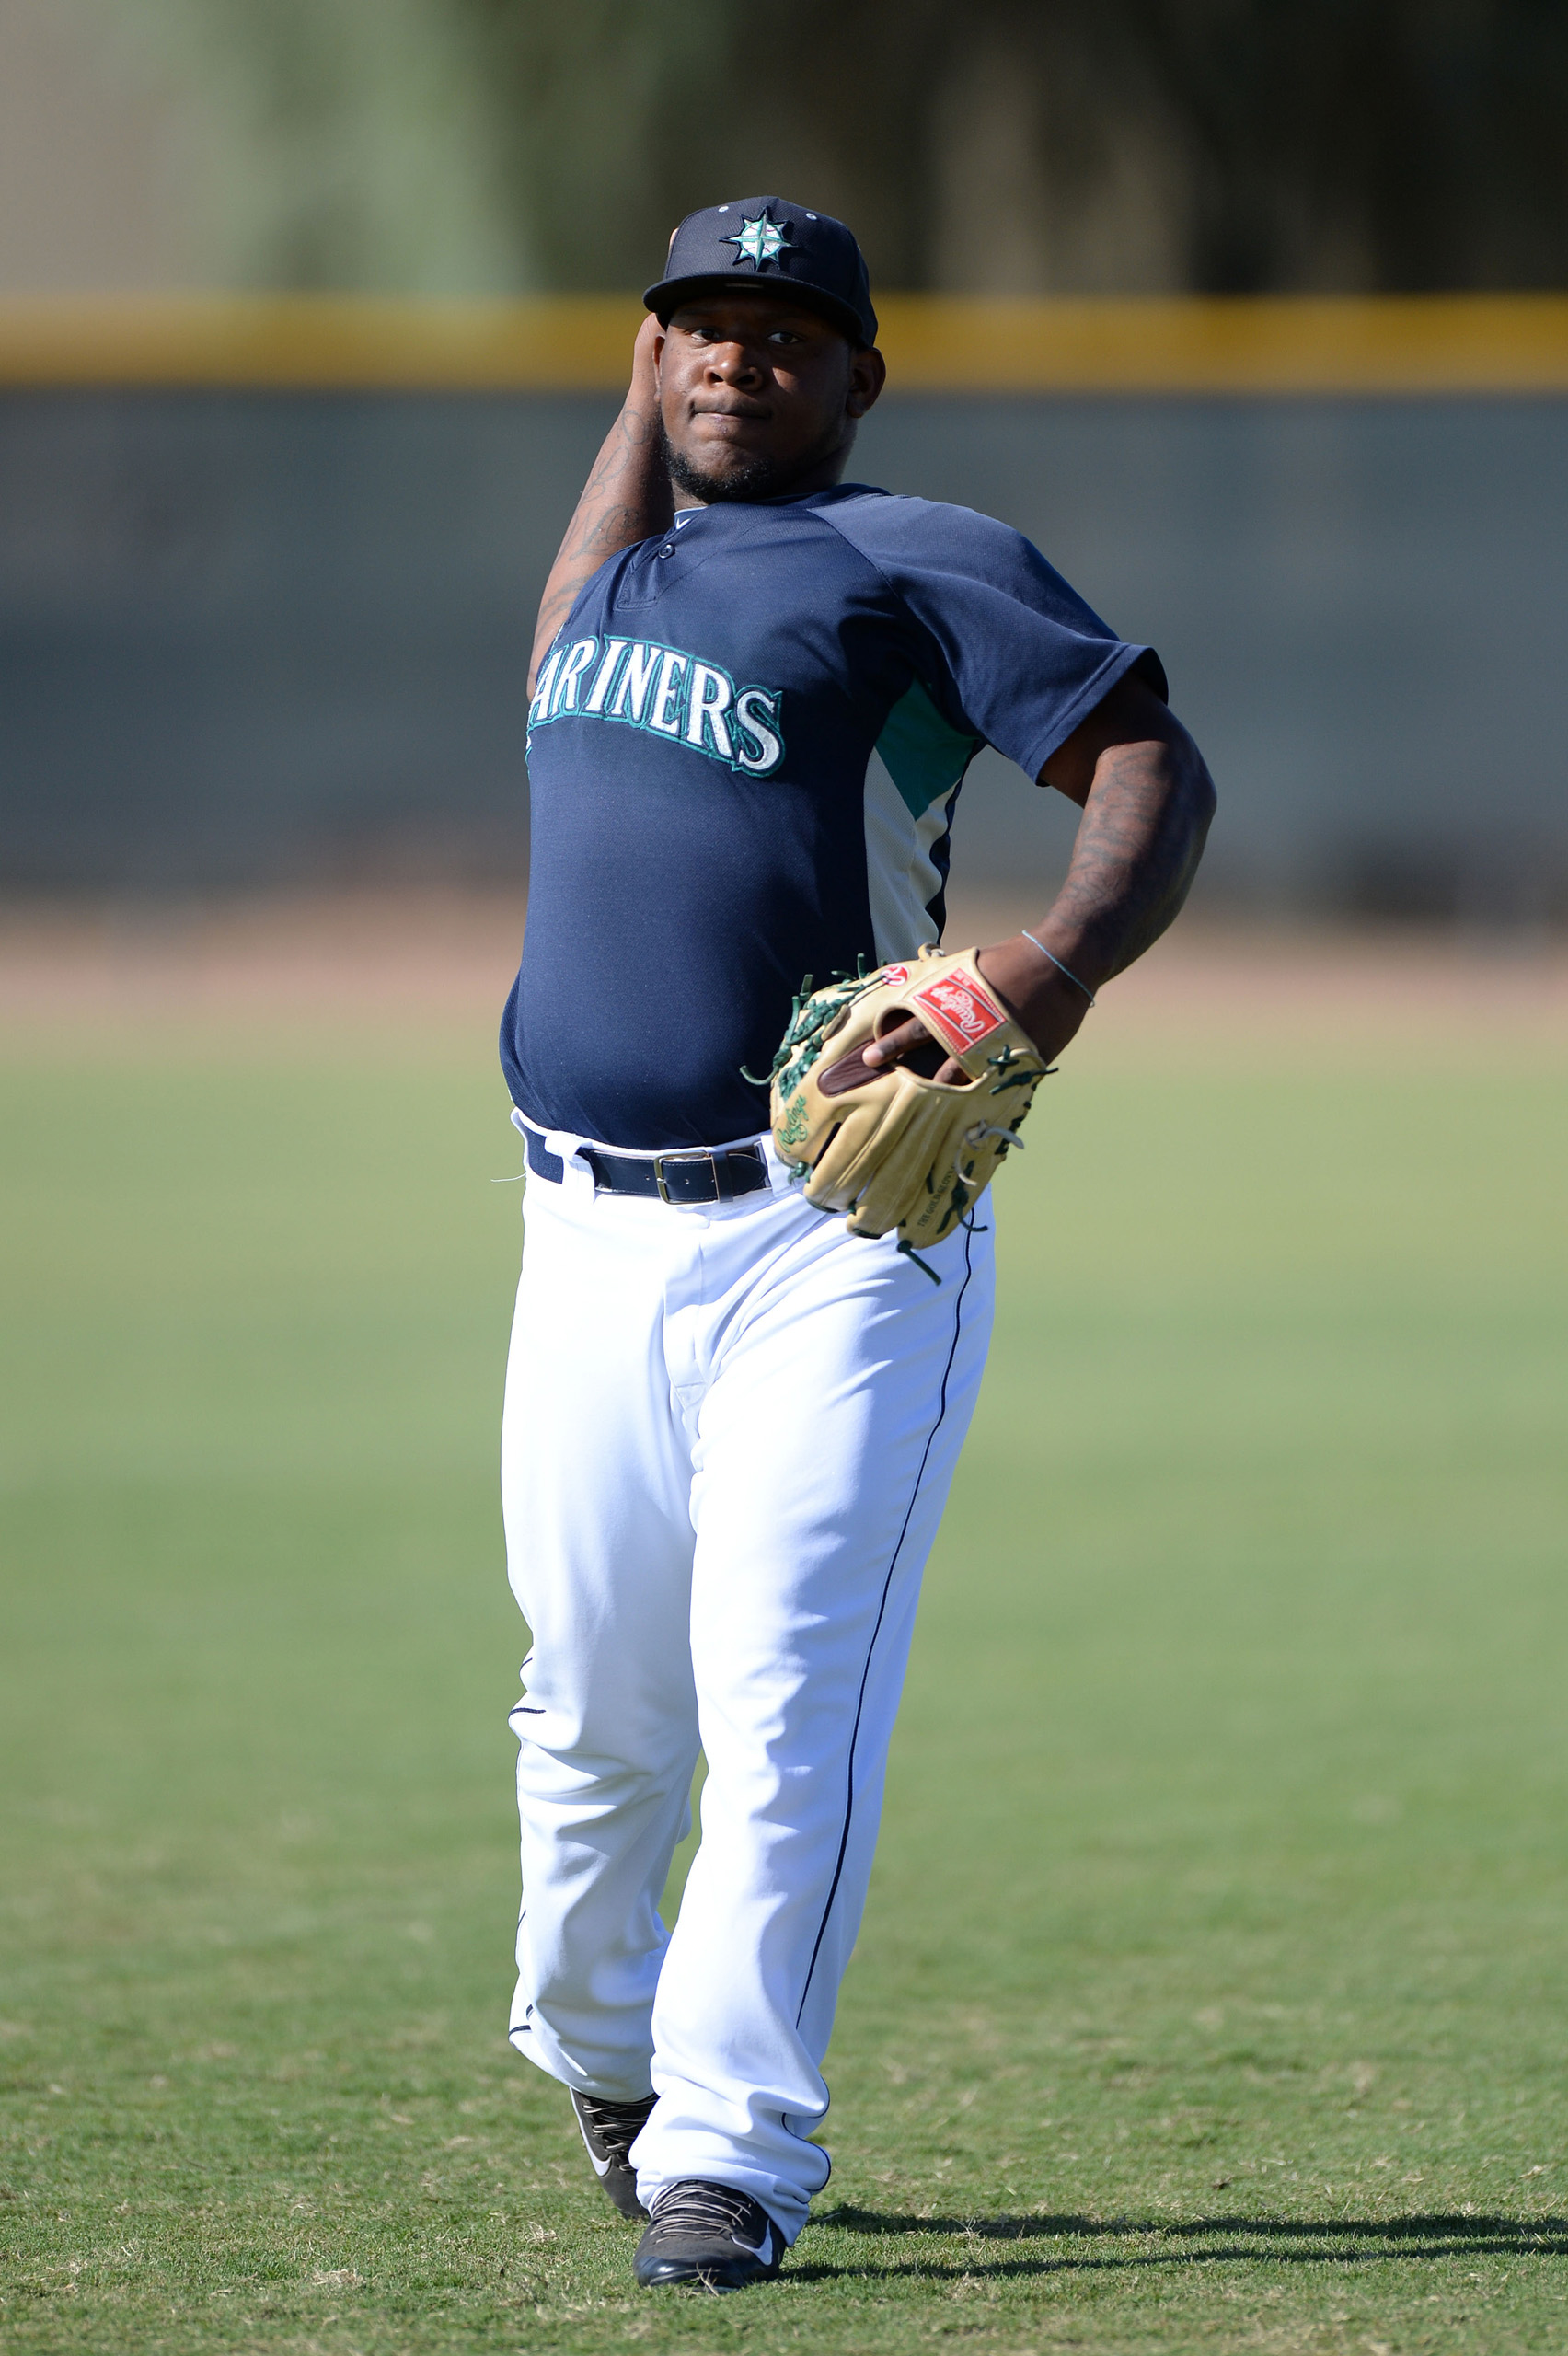 Seattle Mariners pitcher Victor Sanchez during practice before an Instructional League game on Oct. 4, 2013 at Peoria Sports Complex in Peoria, Arizona. (Mike Janes—AP)